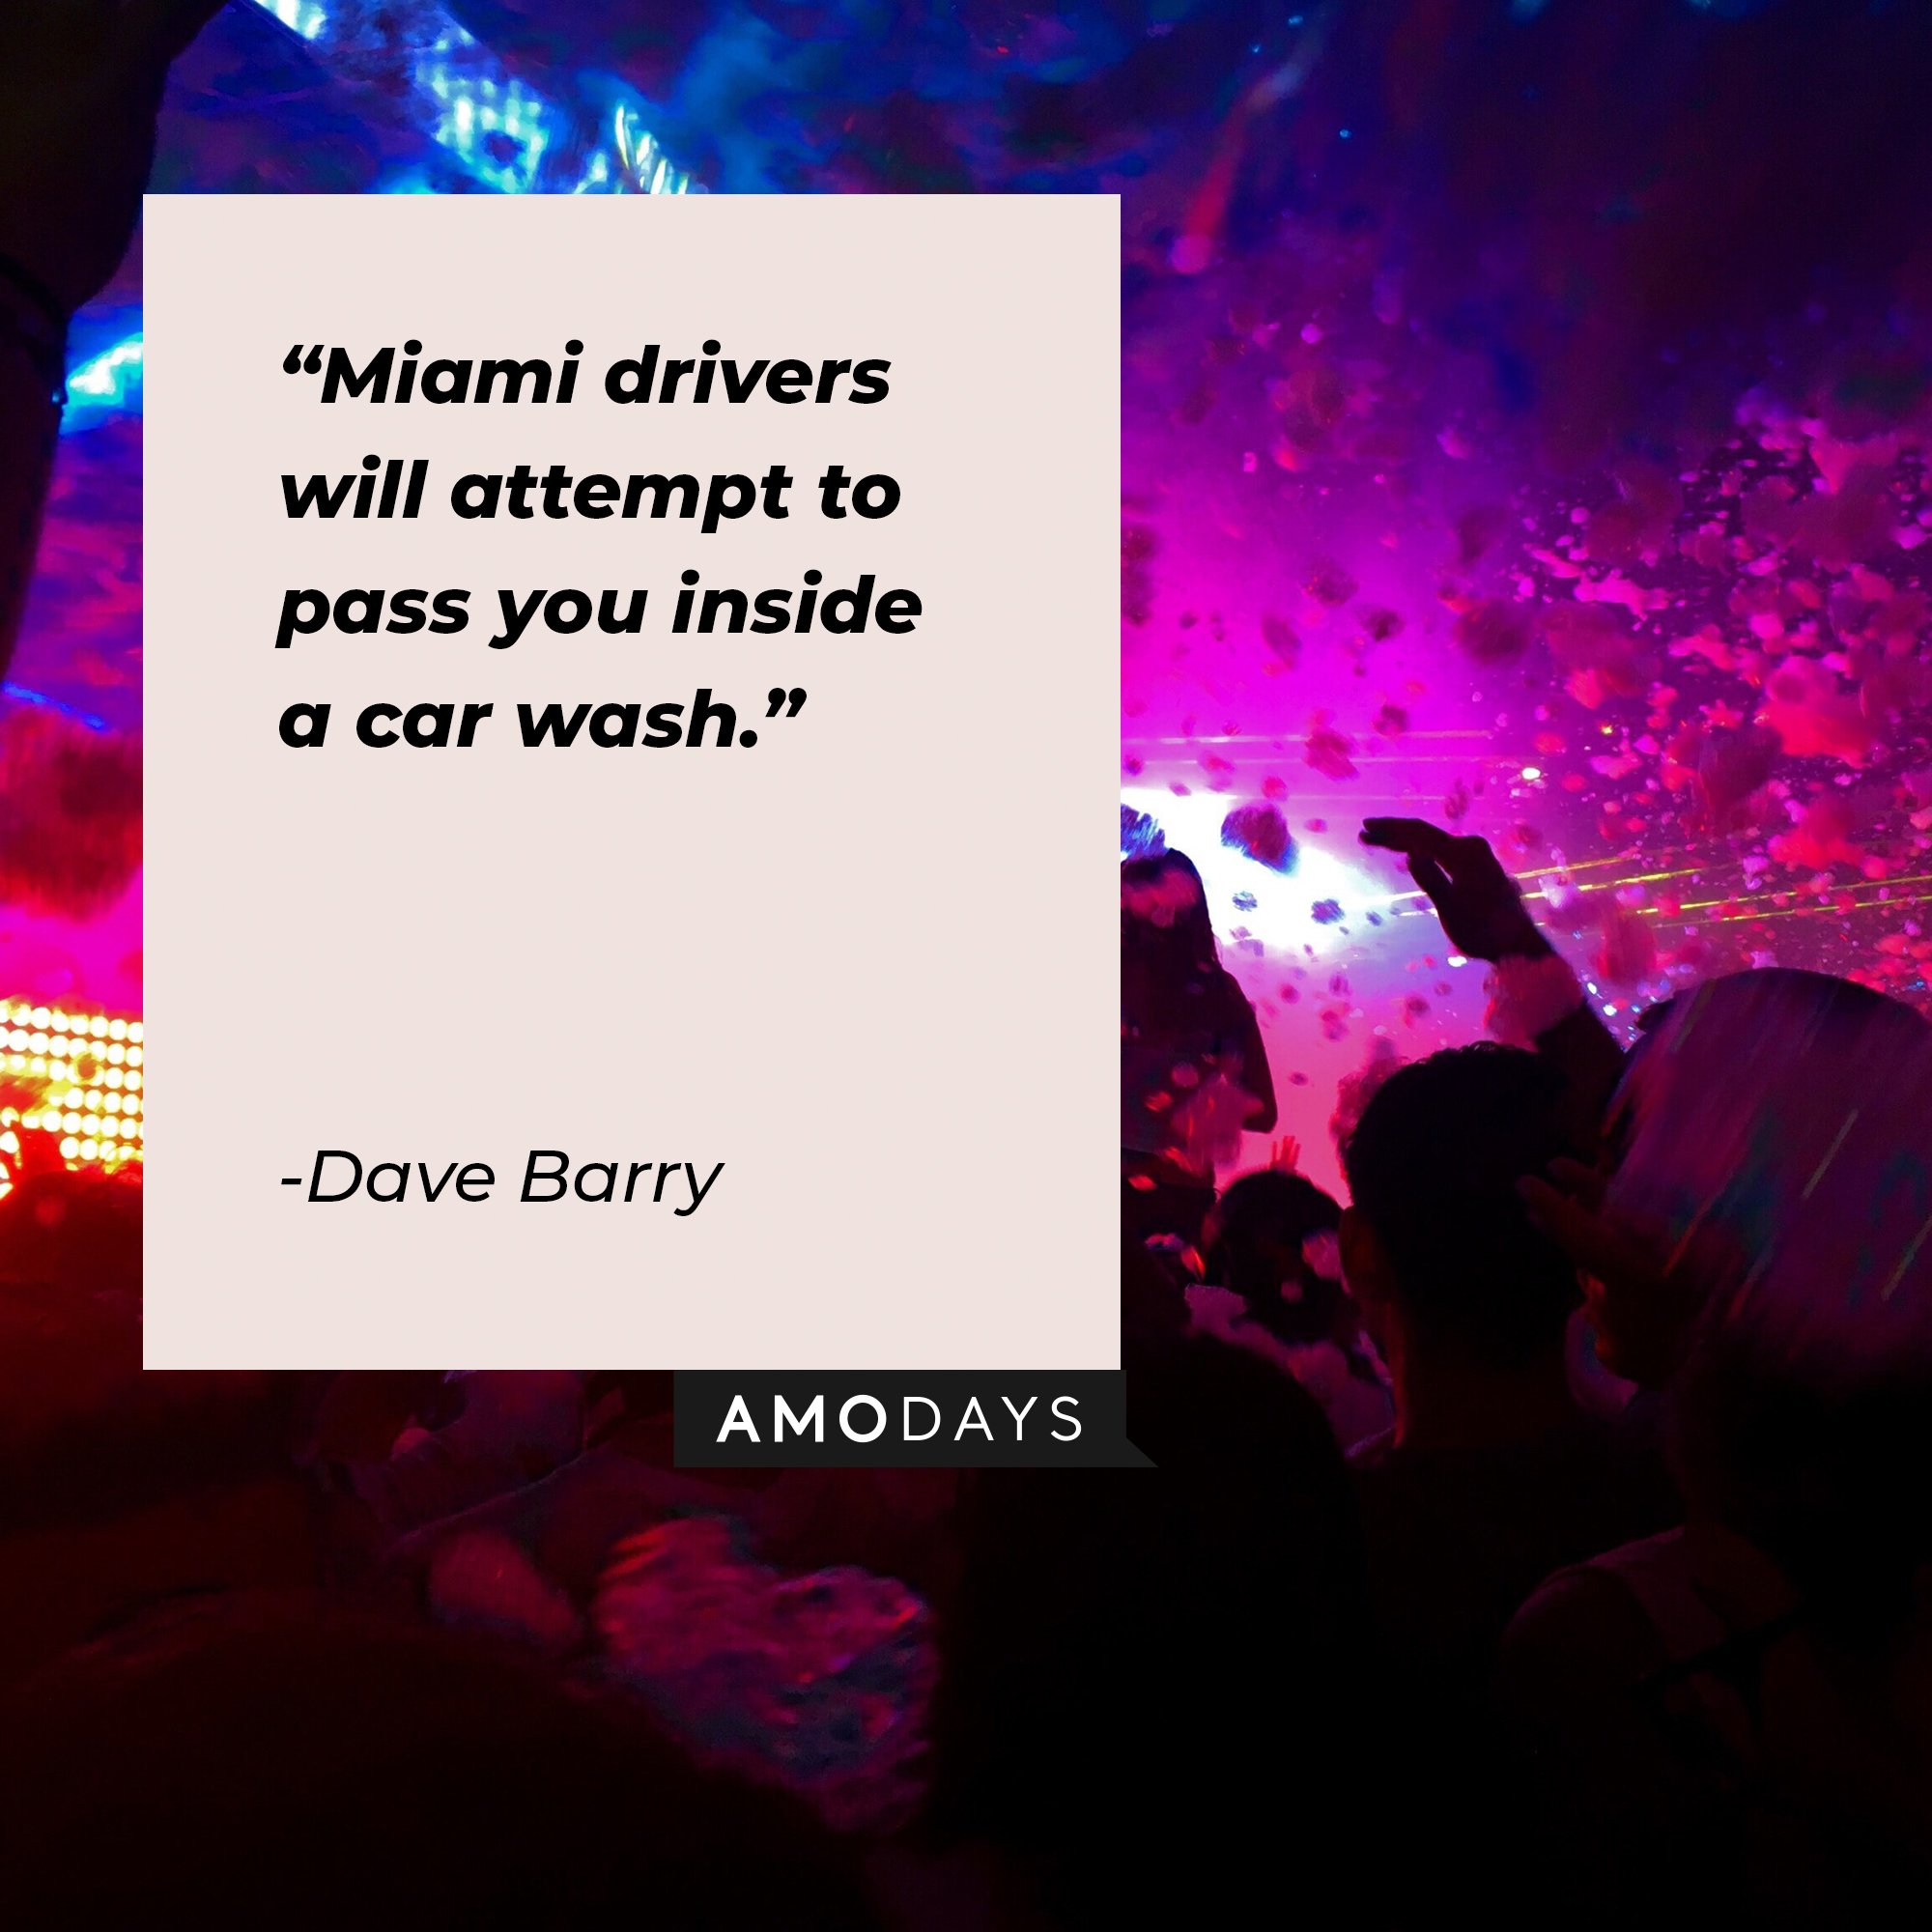 Dave Barry’s quote: "Miami drivers will attempt to pass you inside a car wash." | Image: AmoDays